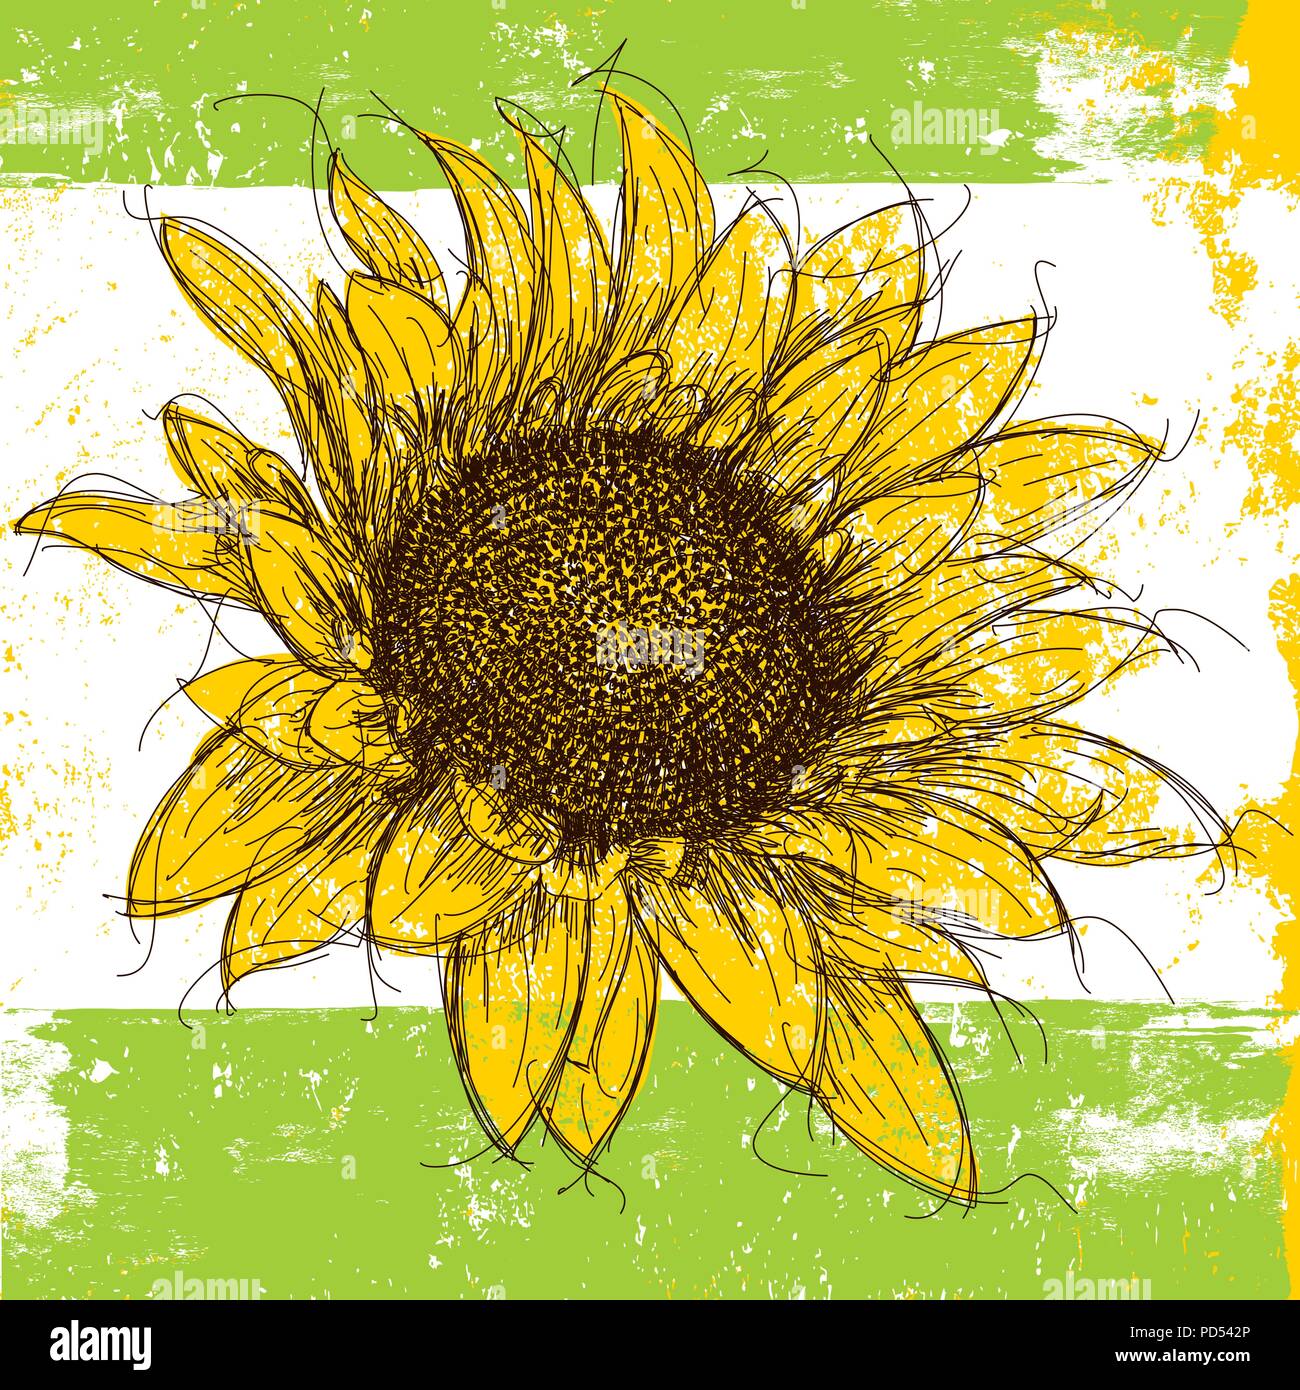 Sunflower Sketchy sunflower over an abstract background. Stock Vector